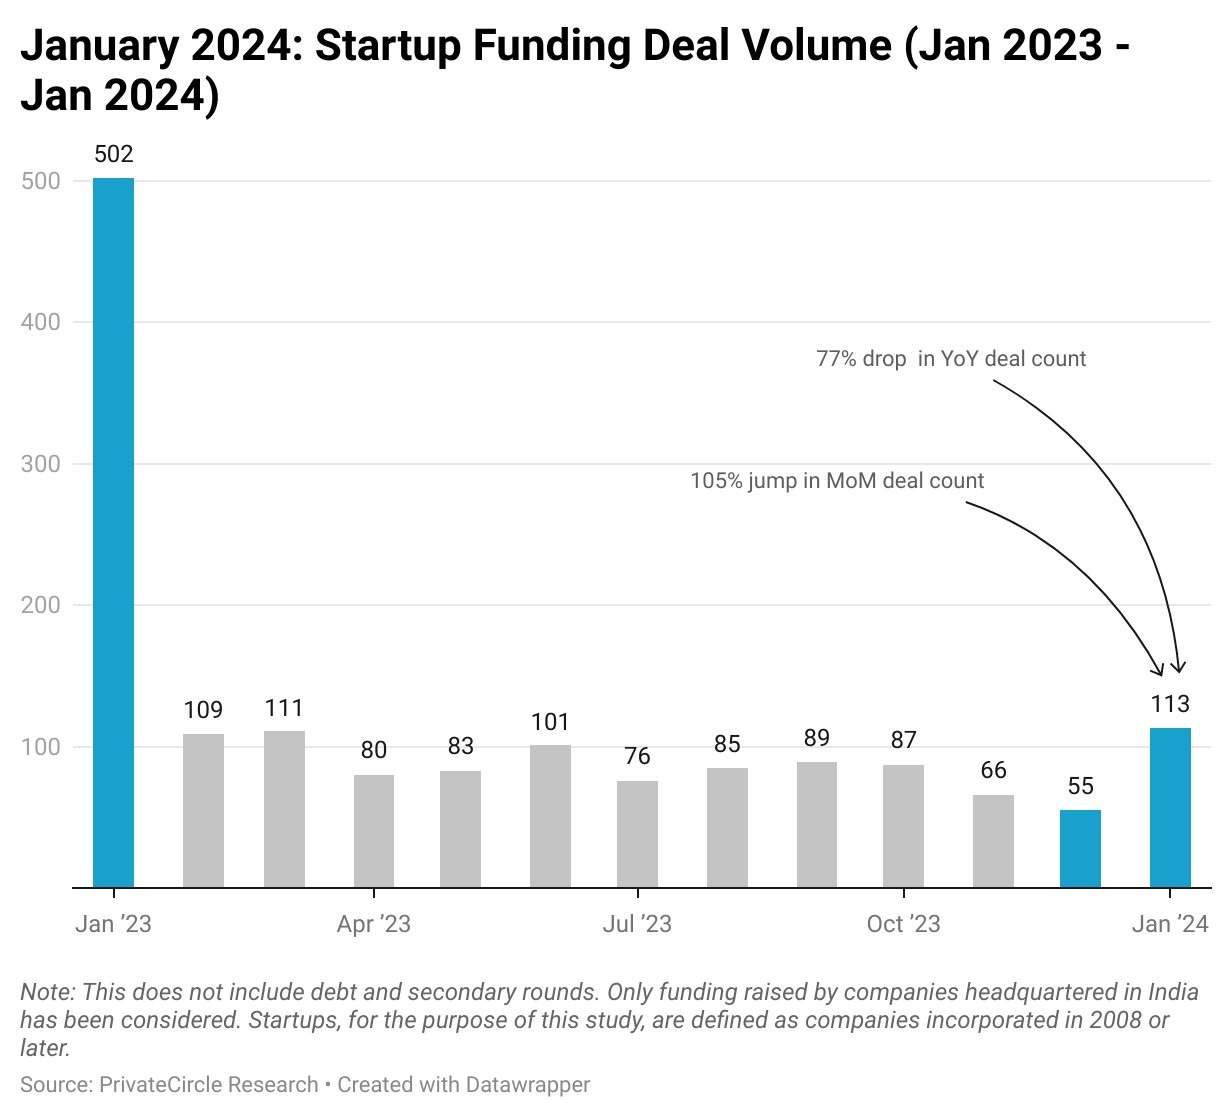 January 2024: Startup Funding Deal Volume (Jan 2023 - Jan 2024)

Deal count in Jan 2024 has gone up 105% as compared to Dec 2023. On the other hand, the deal count dropped 77% as compared to Jan 2023.